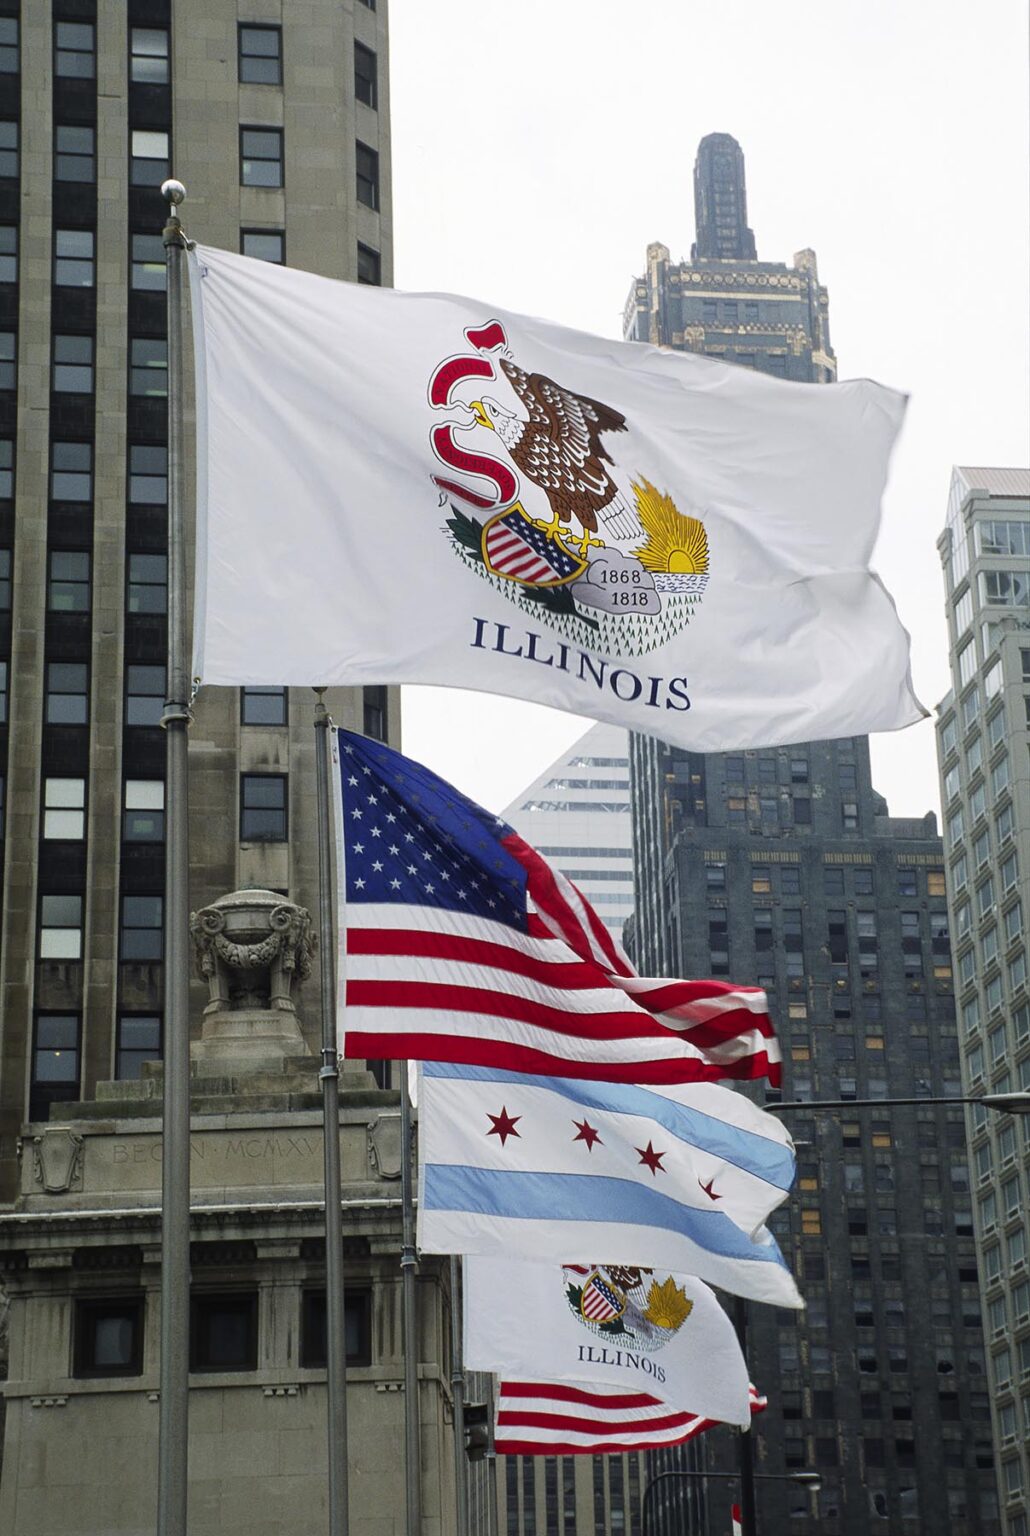 USA, ILLINOIS STATE, and CHICAGO FLAGS proudly fly on the MICHIGAN STREET BRIDGE - CHICAGO, ILLINOI